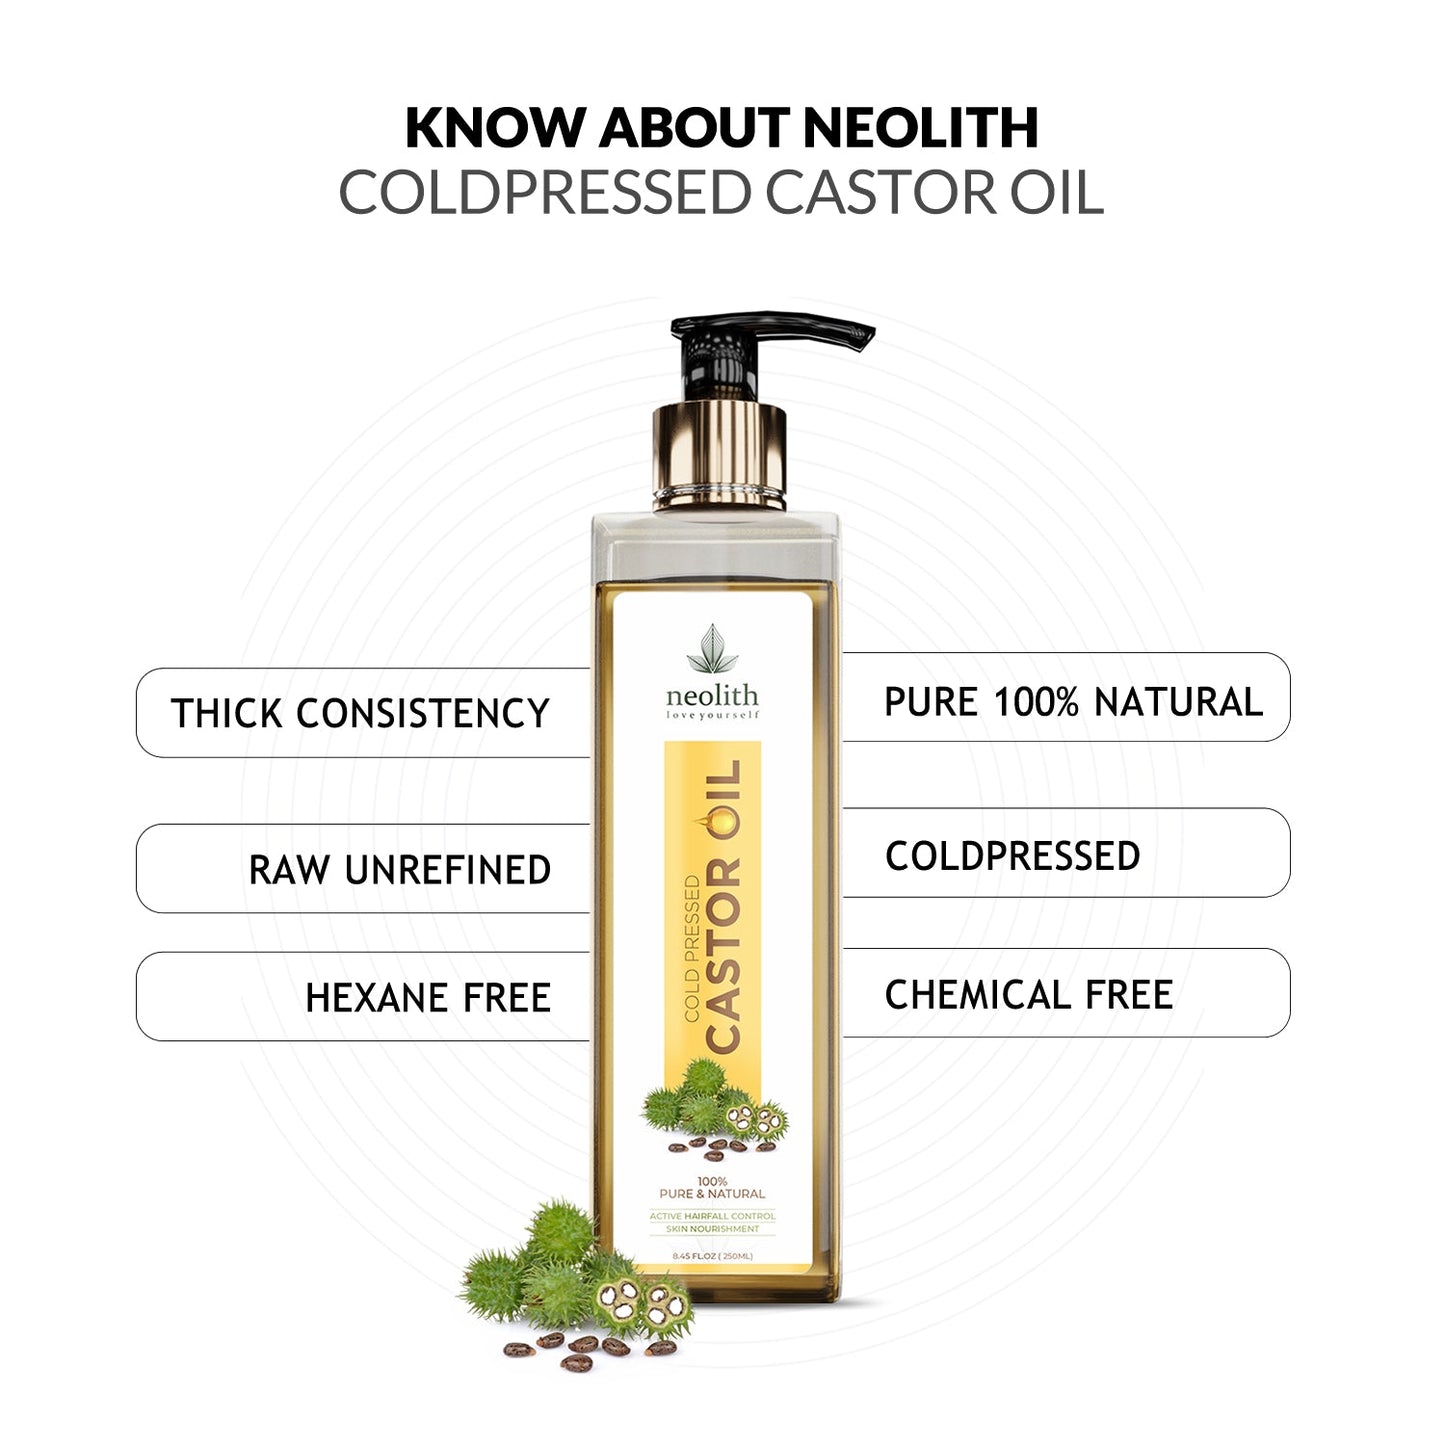 Neolith 100% Organic, Virgin Grade Pure Cold Pressed Castor Oil / Erand Tail (250 ml) Hexan free- For Hair care, Skin care, Eyelashes, Eyebrows, Beard oil, Massage oil, Lash Growth oil, Brow Treatment